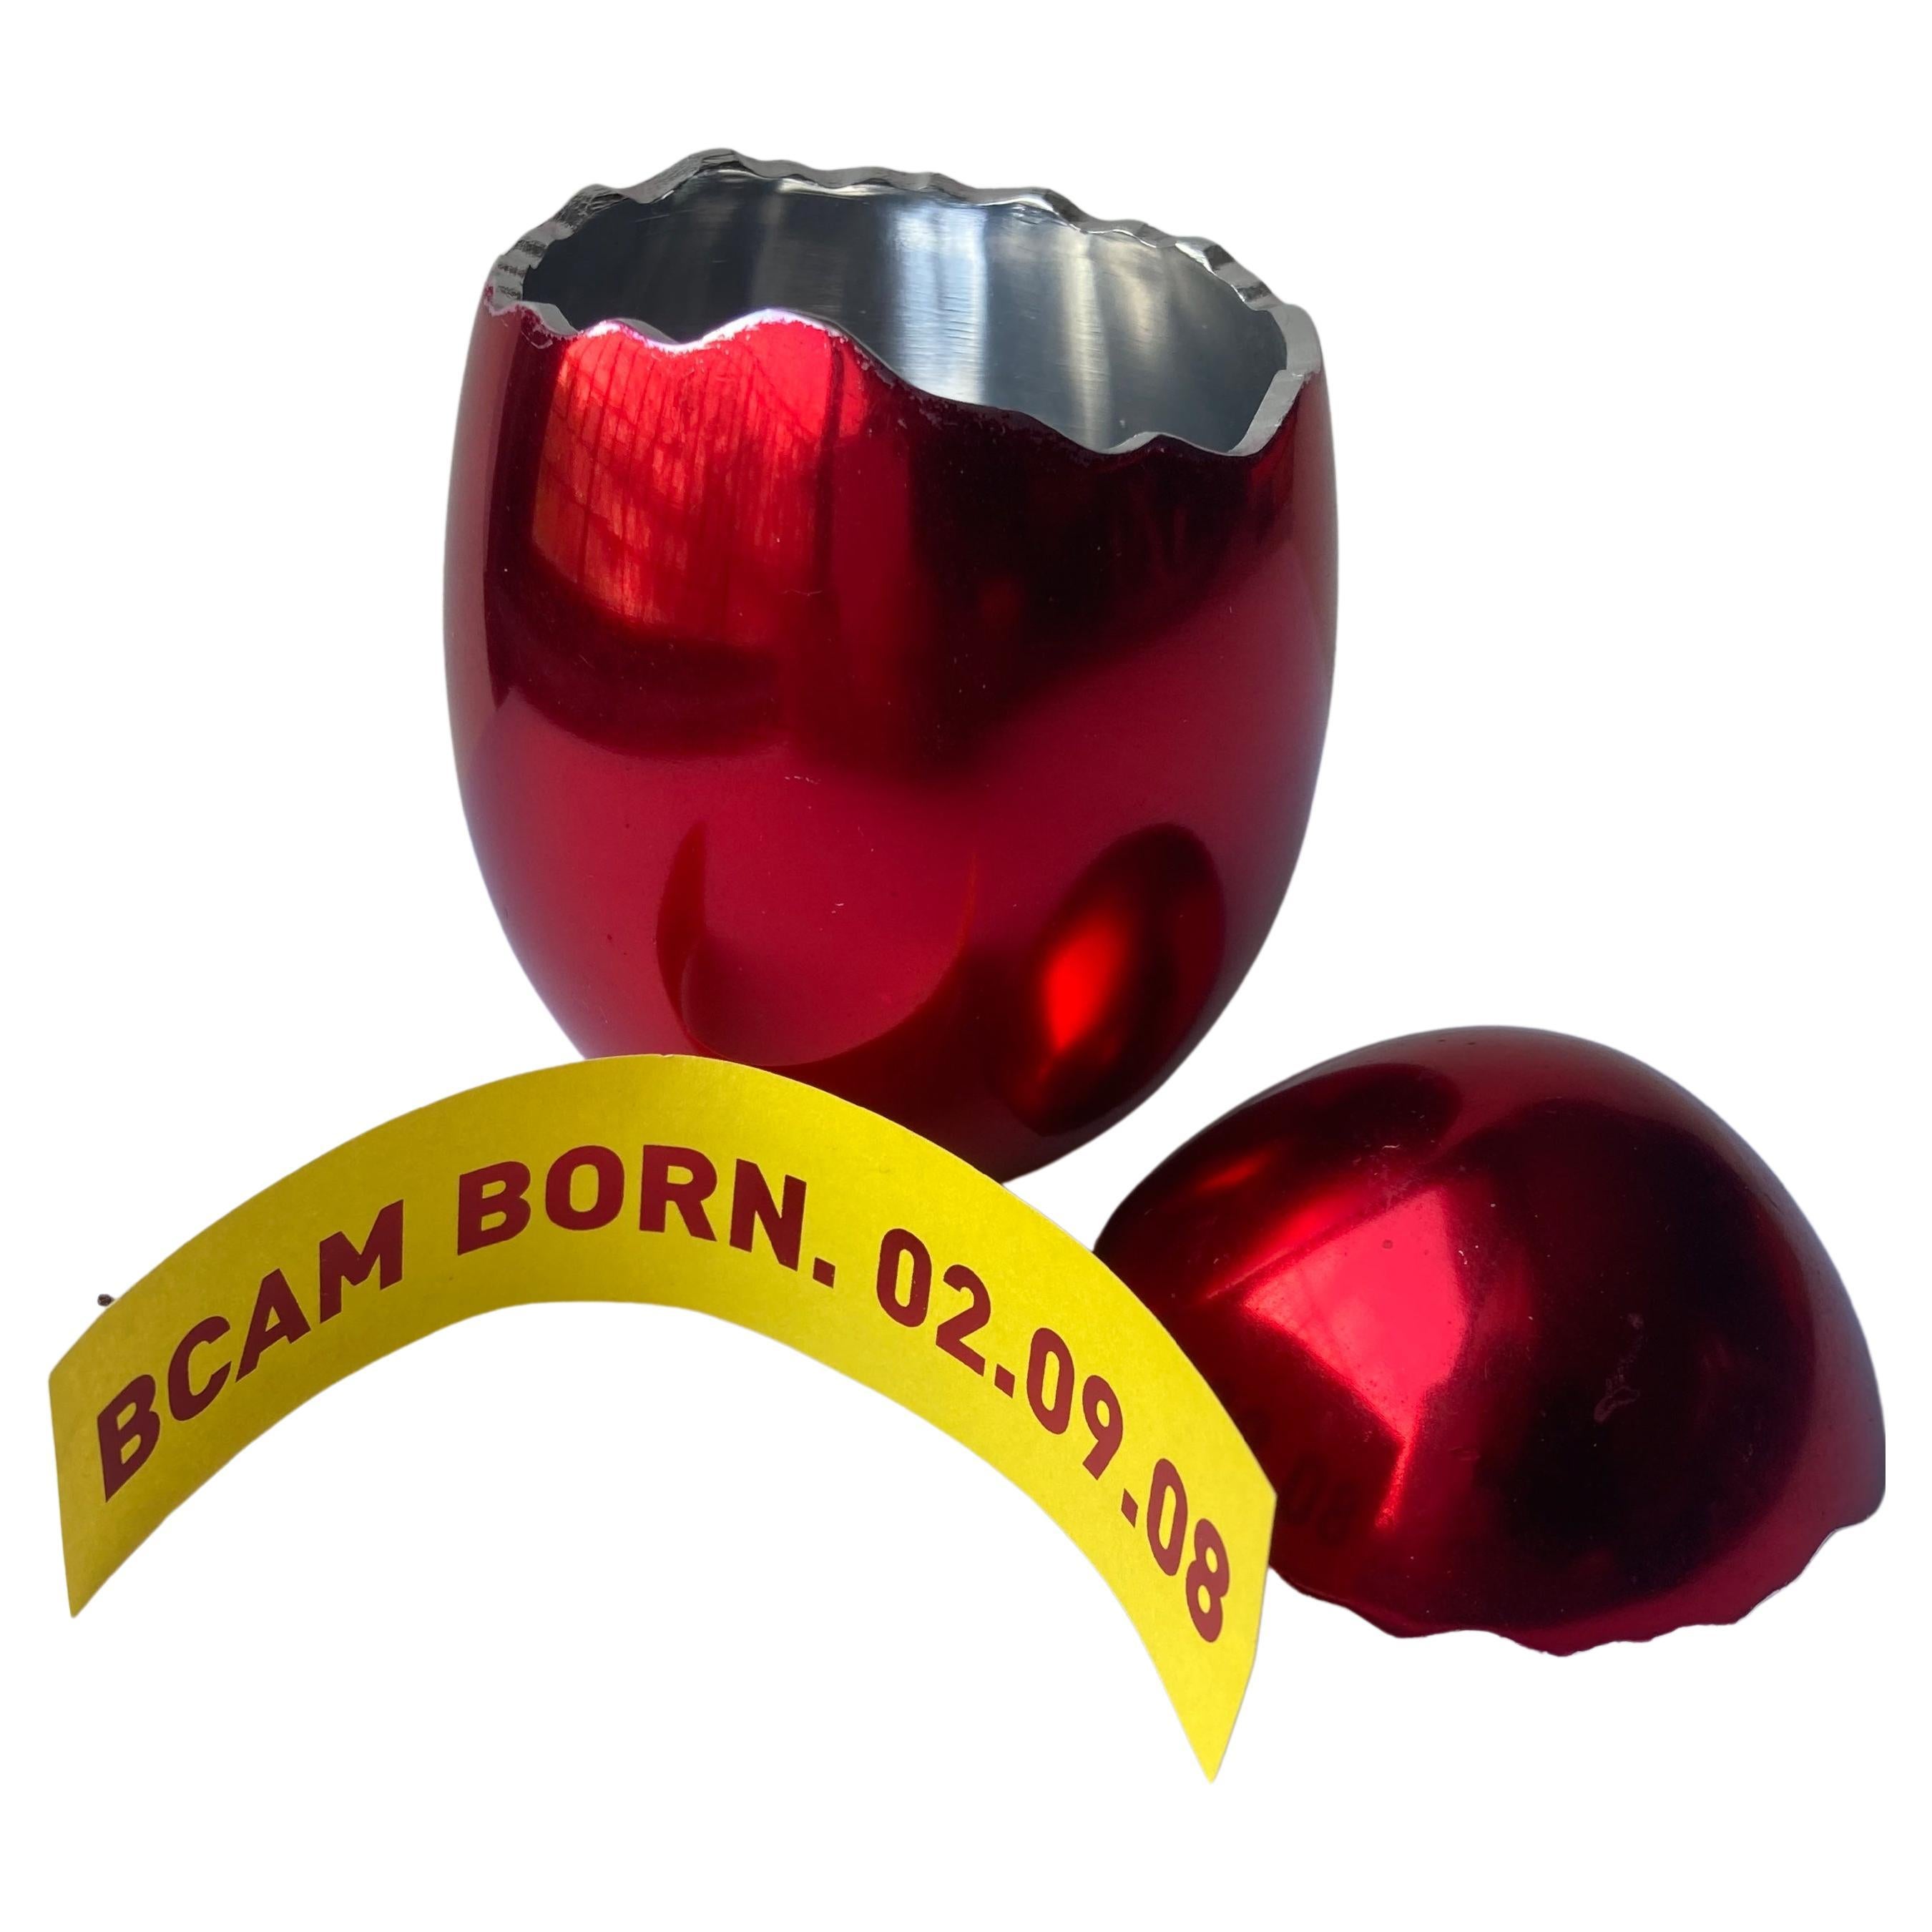 Jeff Koons"Cracked Egg Red"Aluminum/Sculpture/Box, with Yellow, Birth Certifica